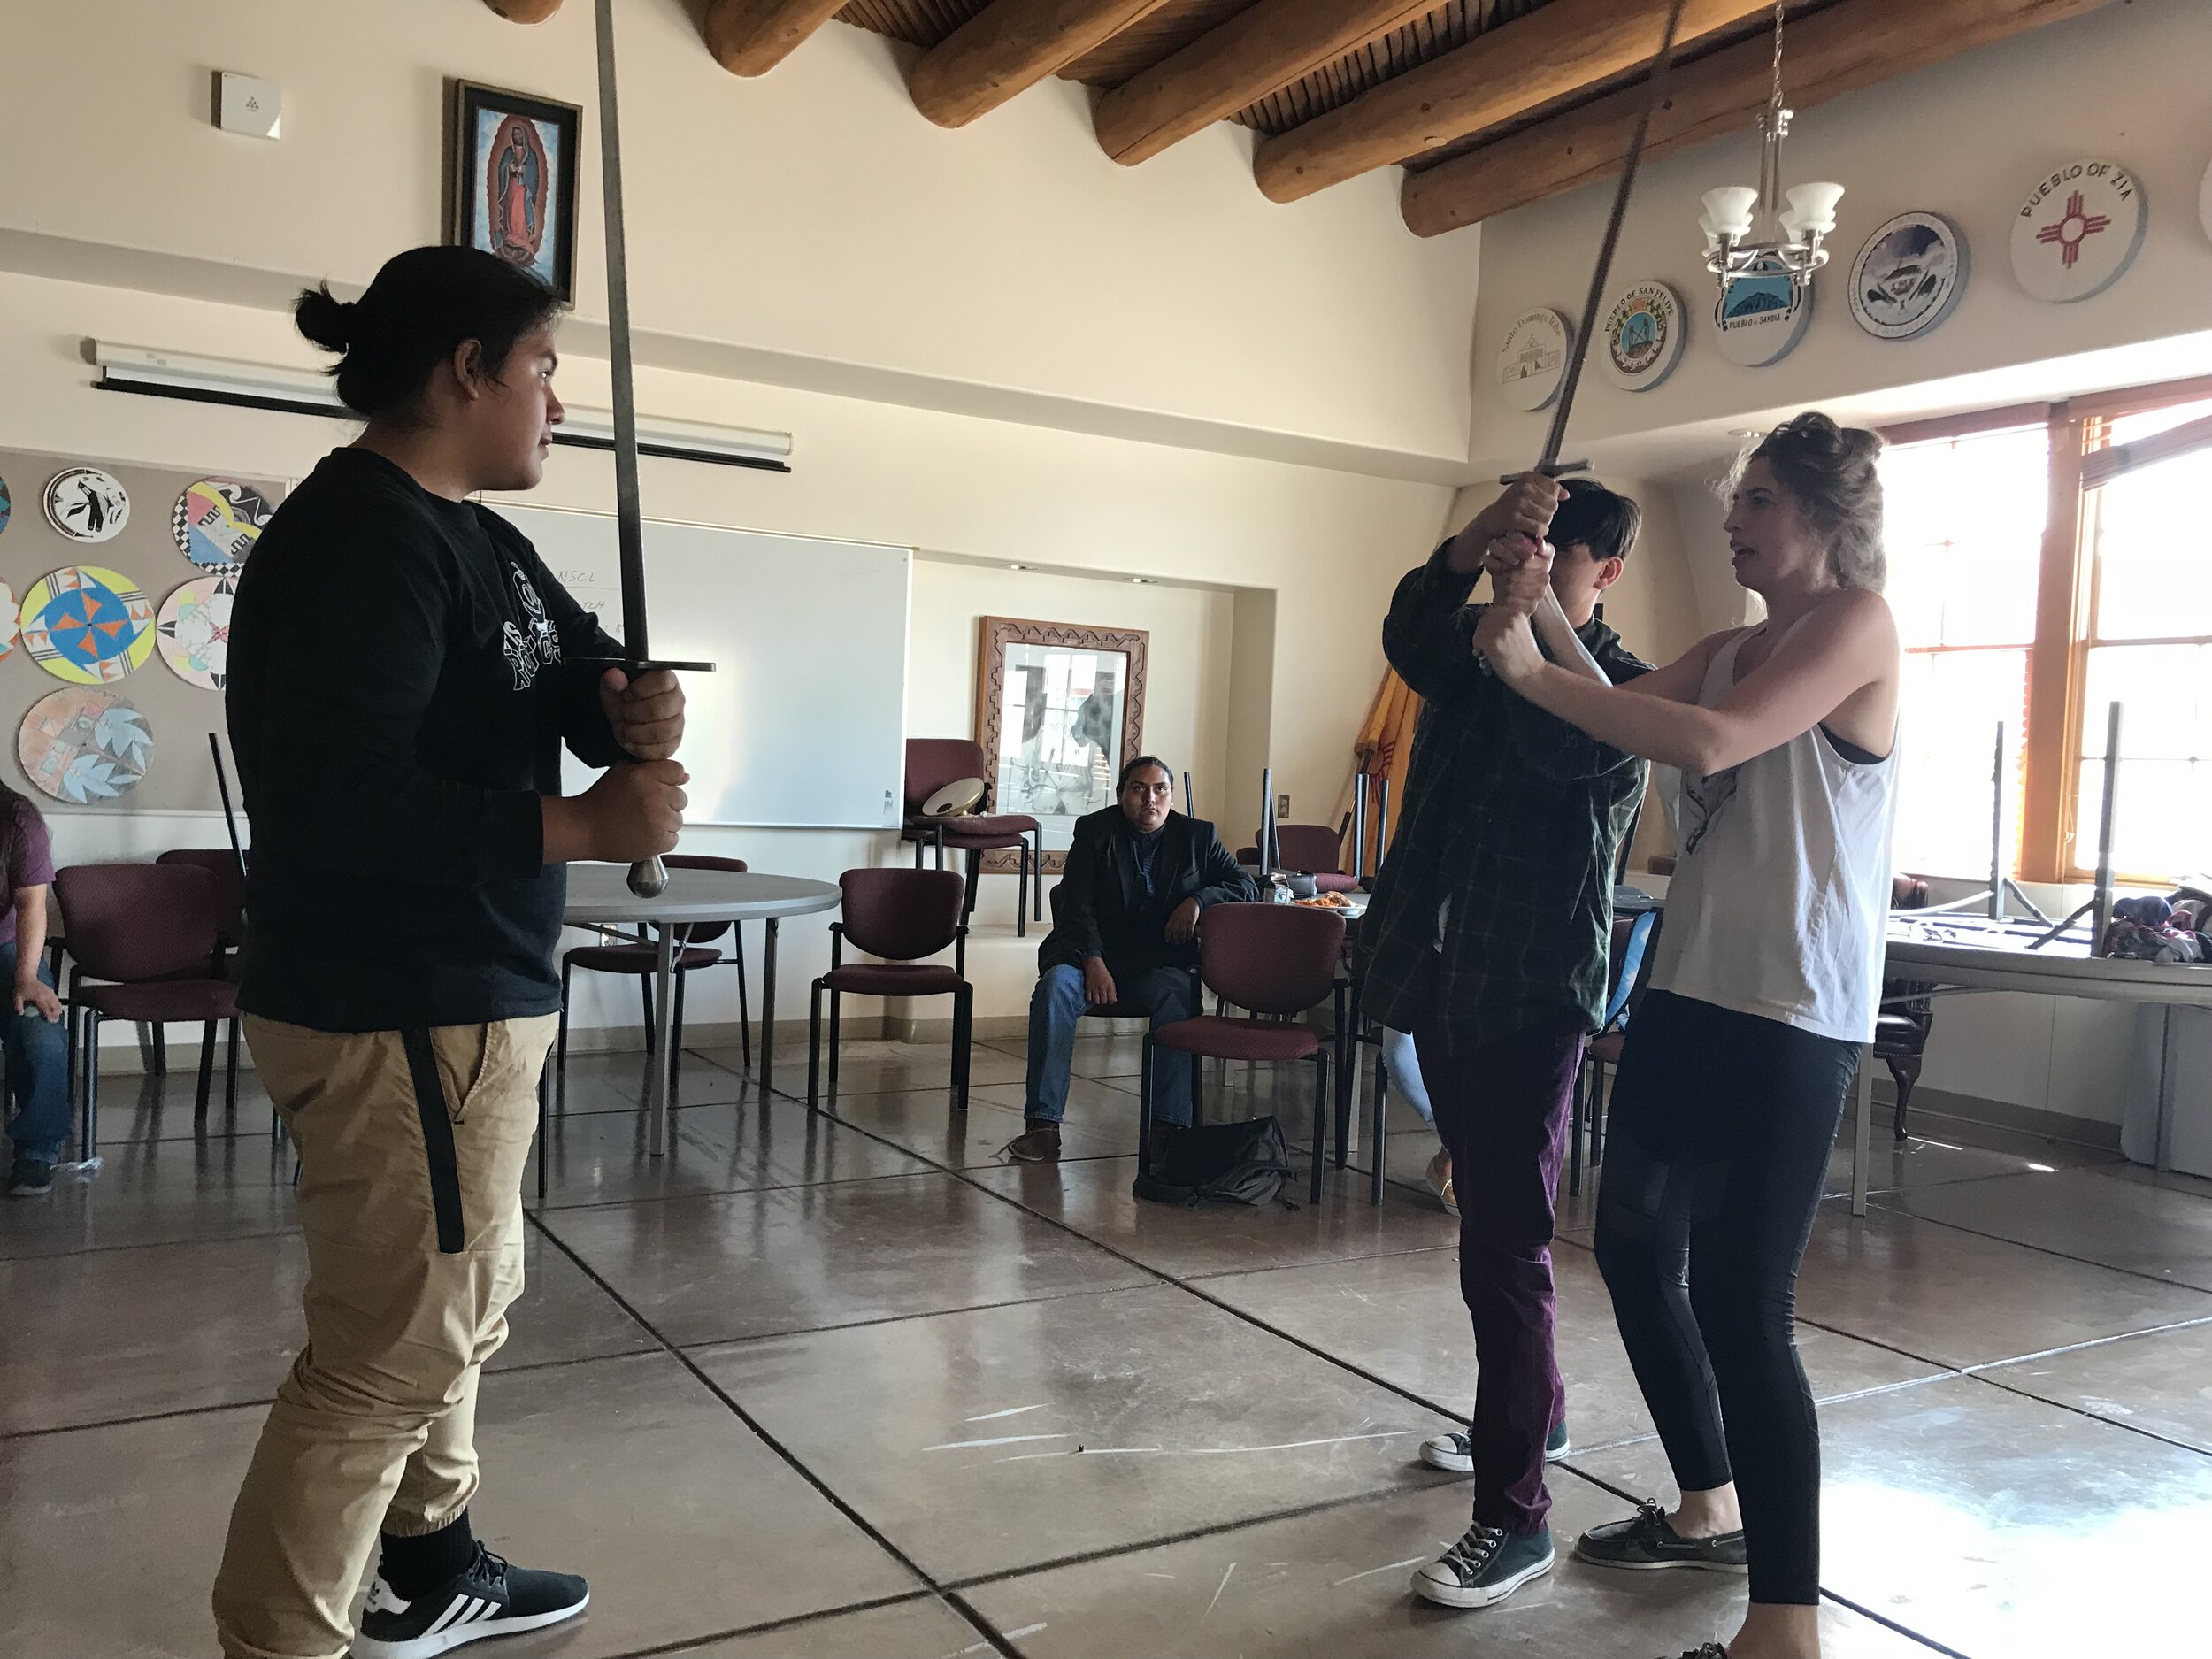 Teaching a stage combat workshop at Santa Fe Indian School